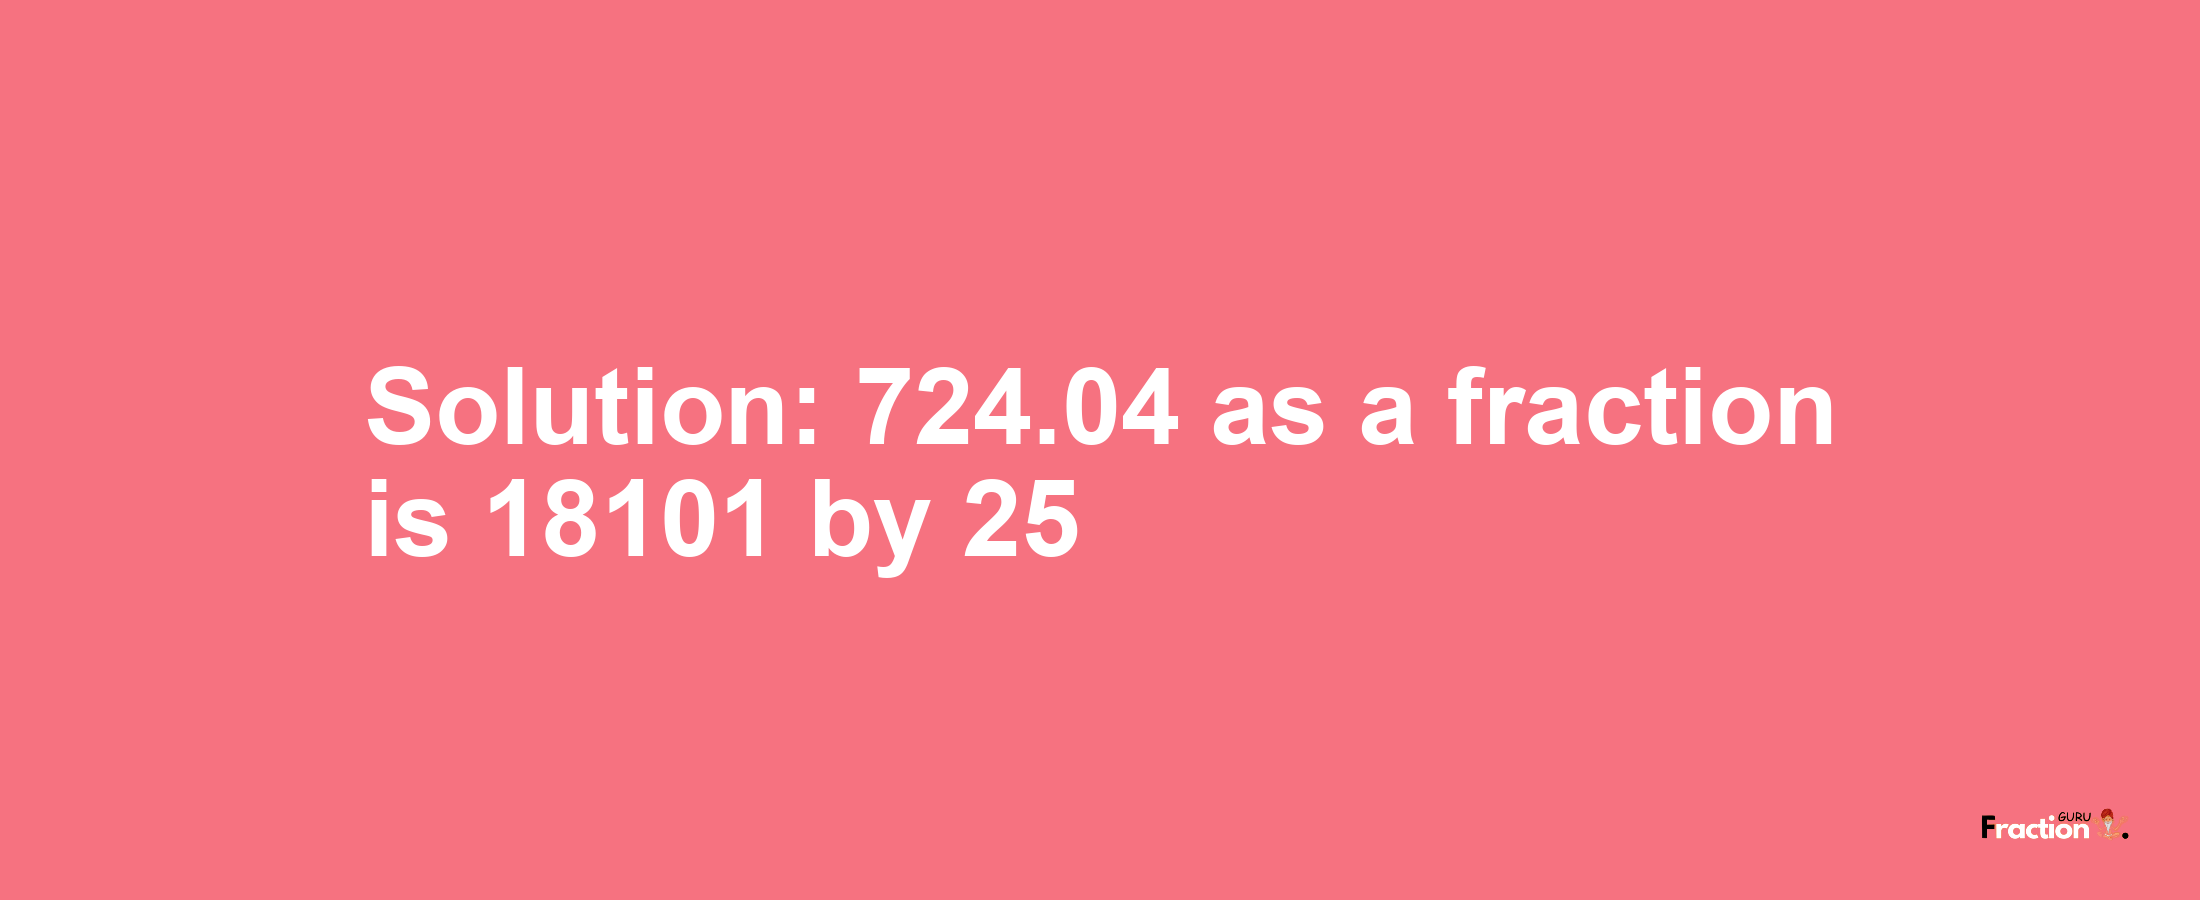 Solution:724.04 as a fraction is 18101/25